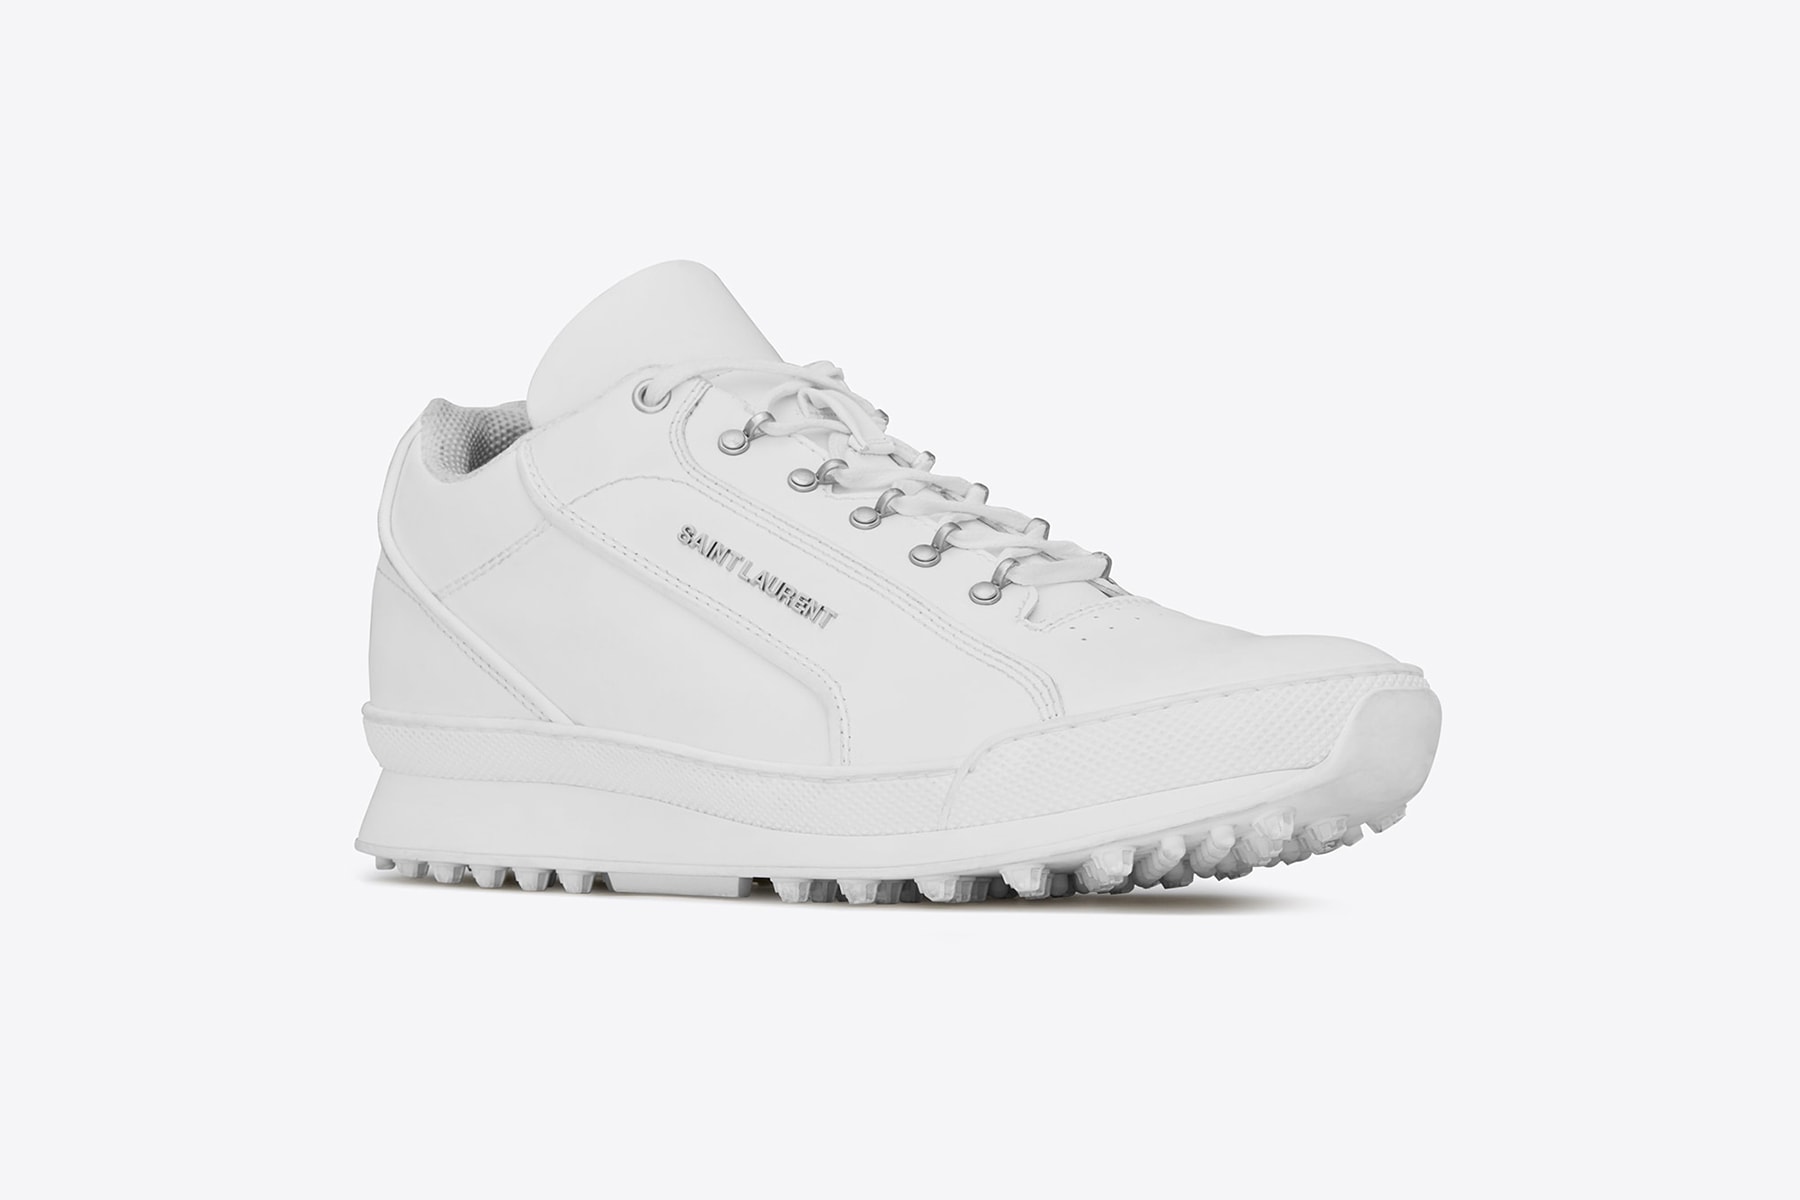 saint laurent jump sneaker premium white leather chunky shoe profile side view leather